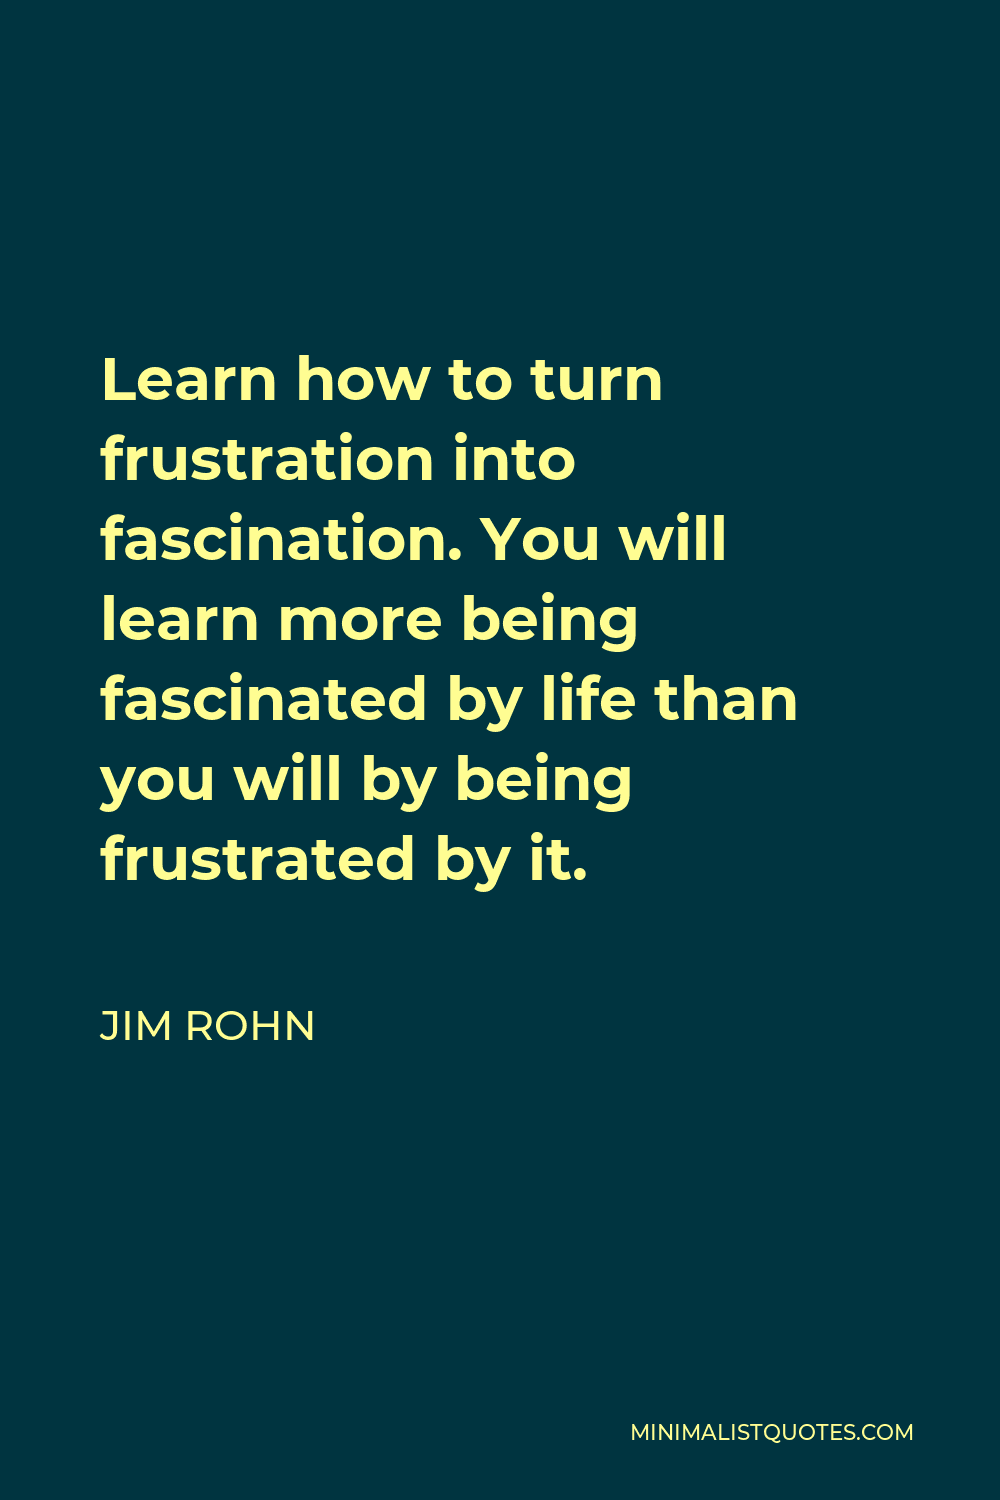 Jim Rohn Quote - Learn how to turn frustration into fascination. You will learn more being fascinated by life than you will by being frustrated by it.